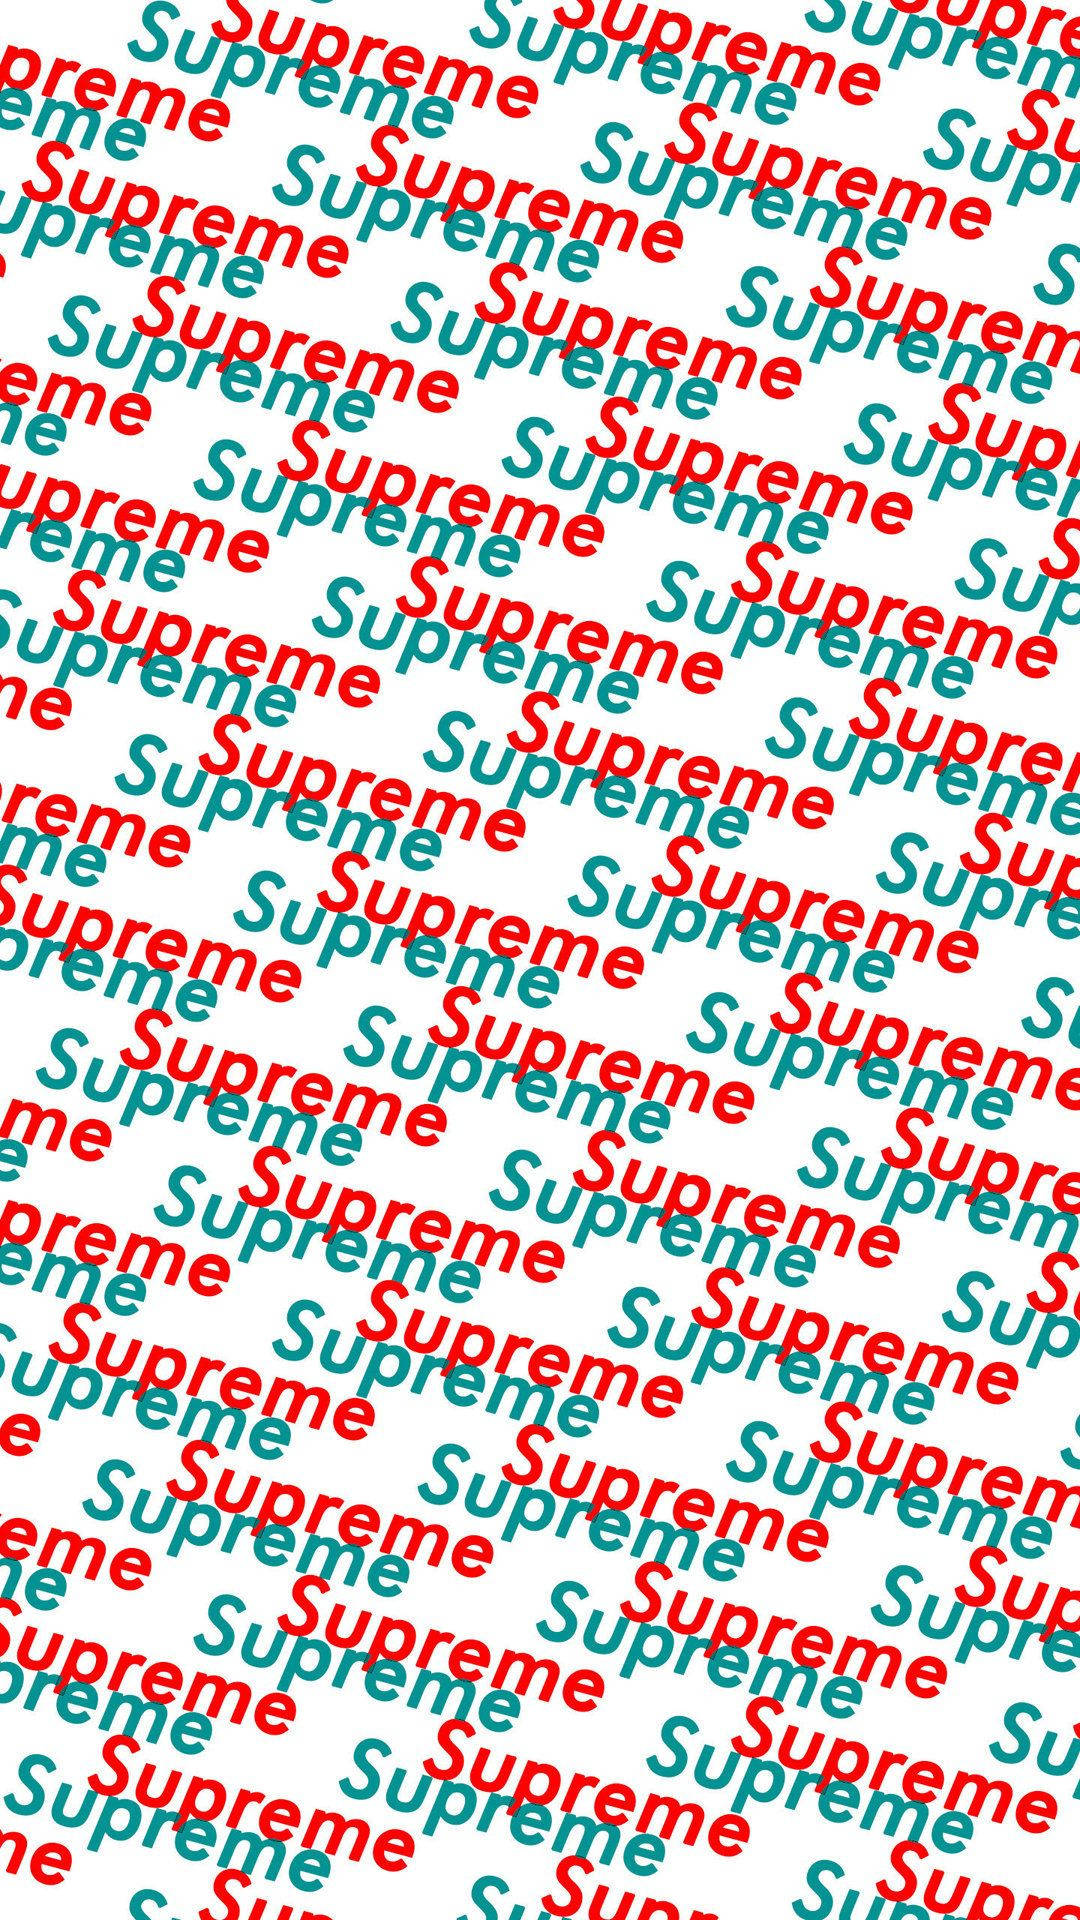 1080X1920 Supreme Wallpaper and Background